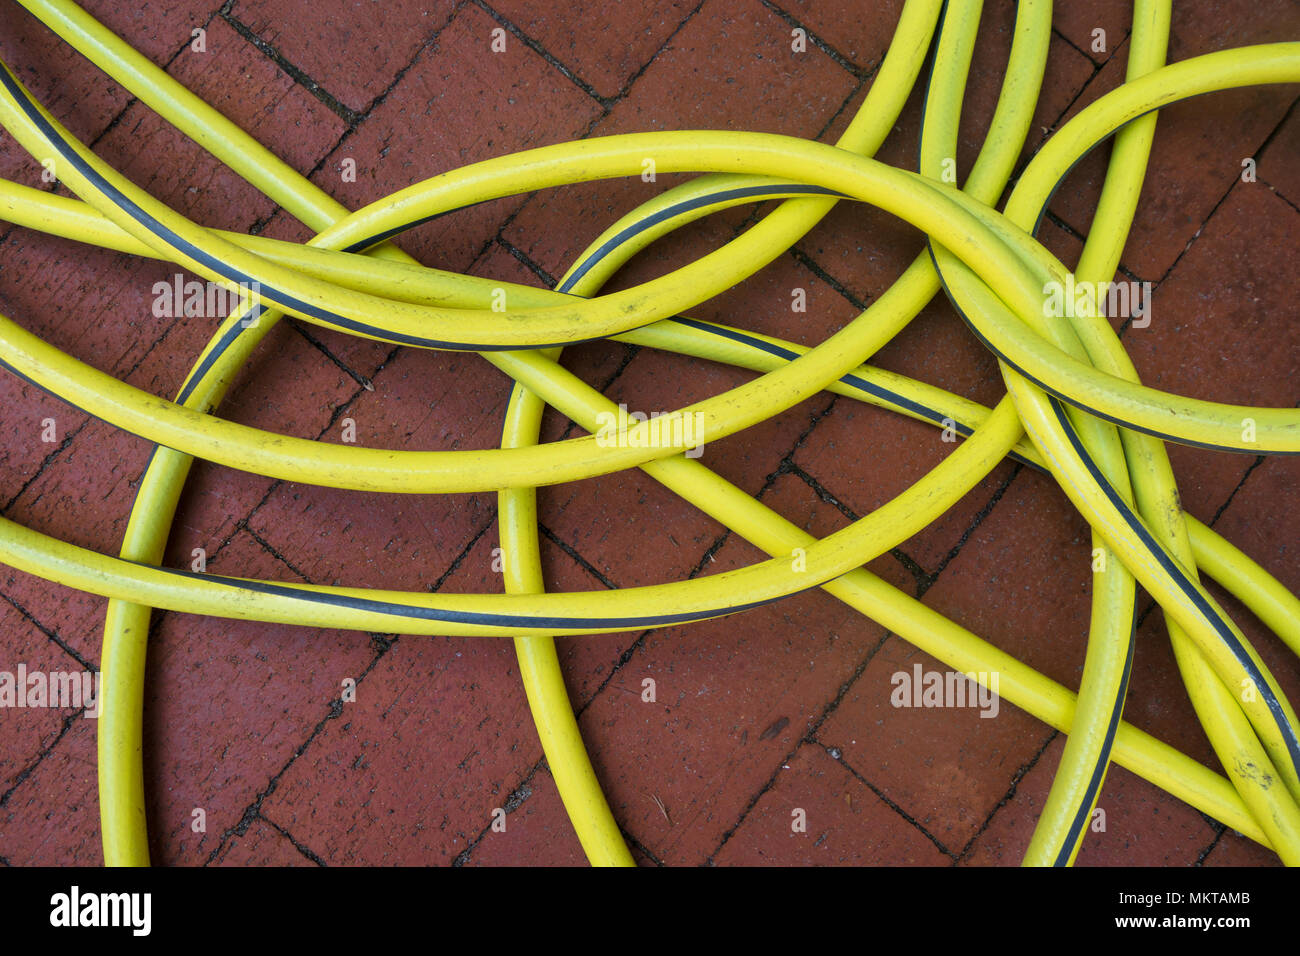 A yellow garden hose forms an interesting pattern of curves on a brick sidewalk Stock Photo